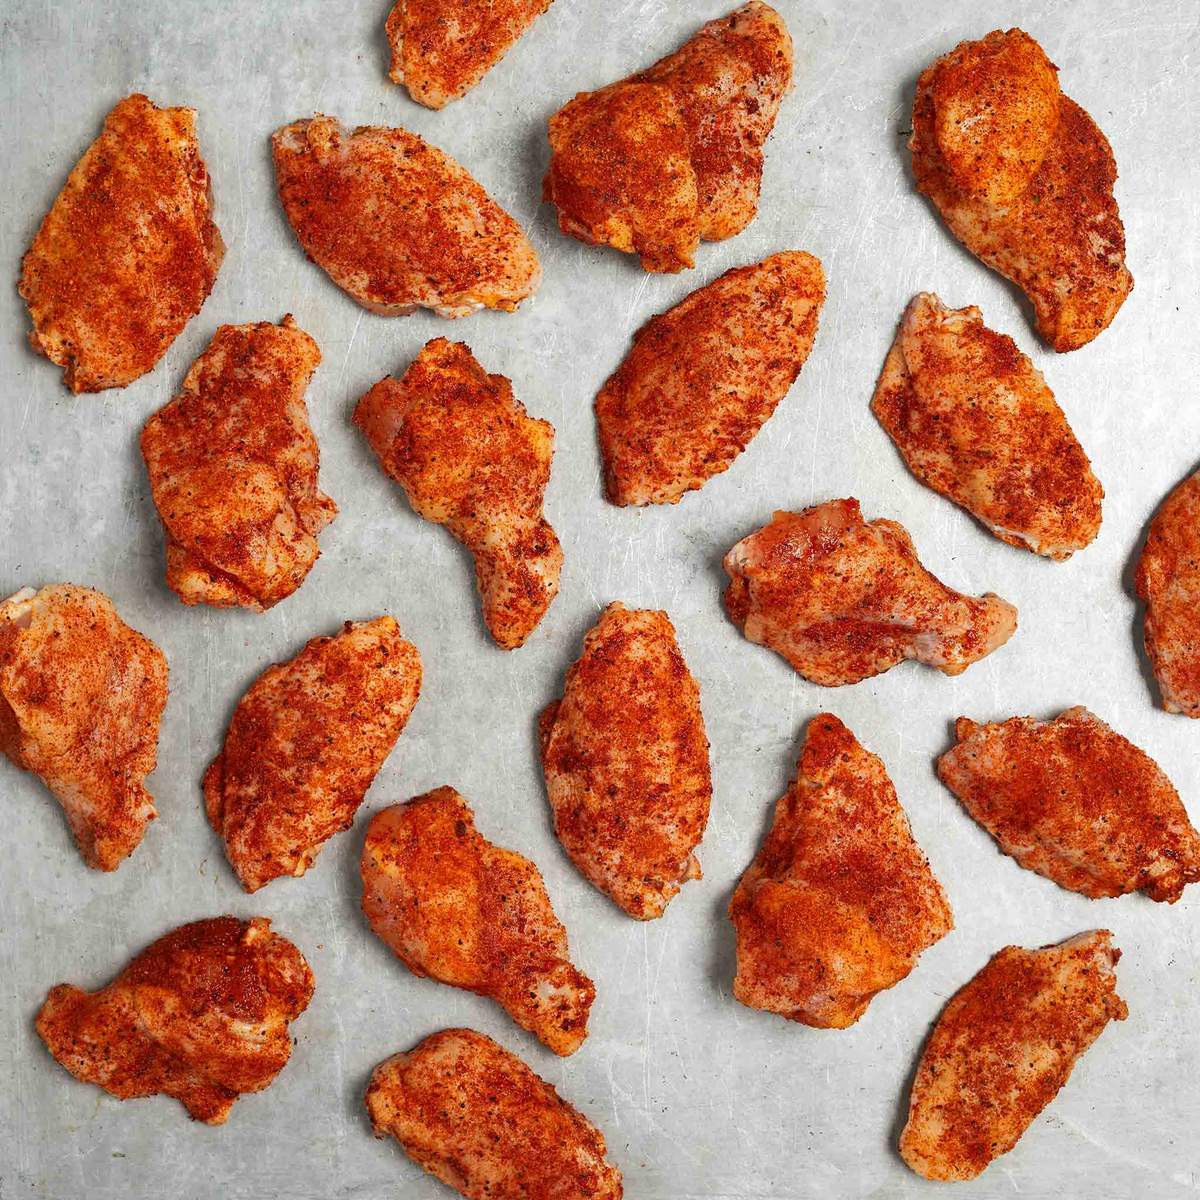 MESQUITE CHICKEN WINGS (2.5LB)